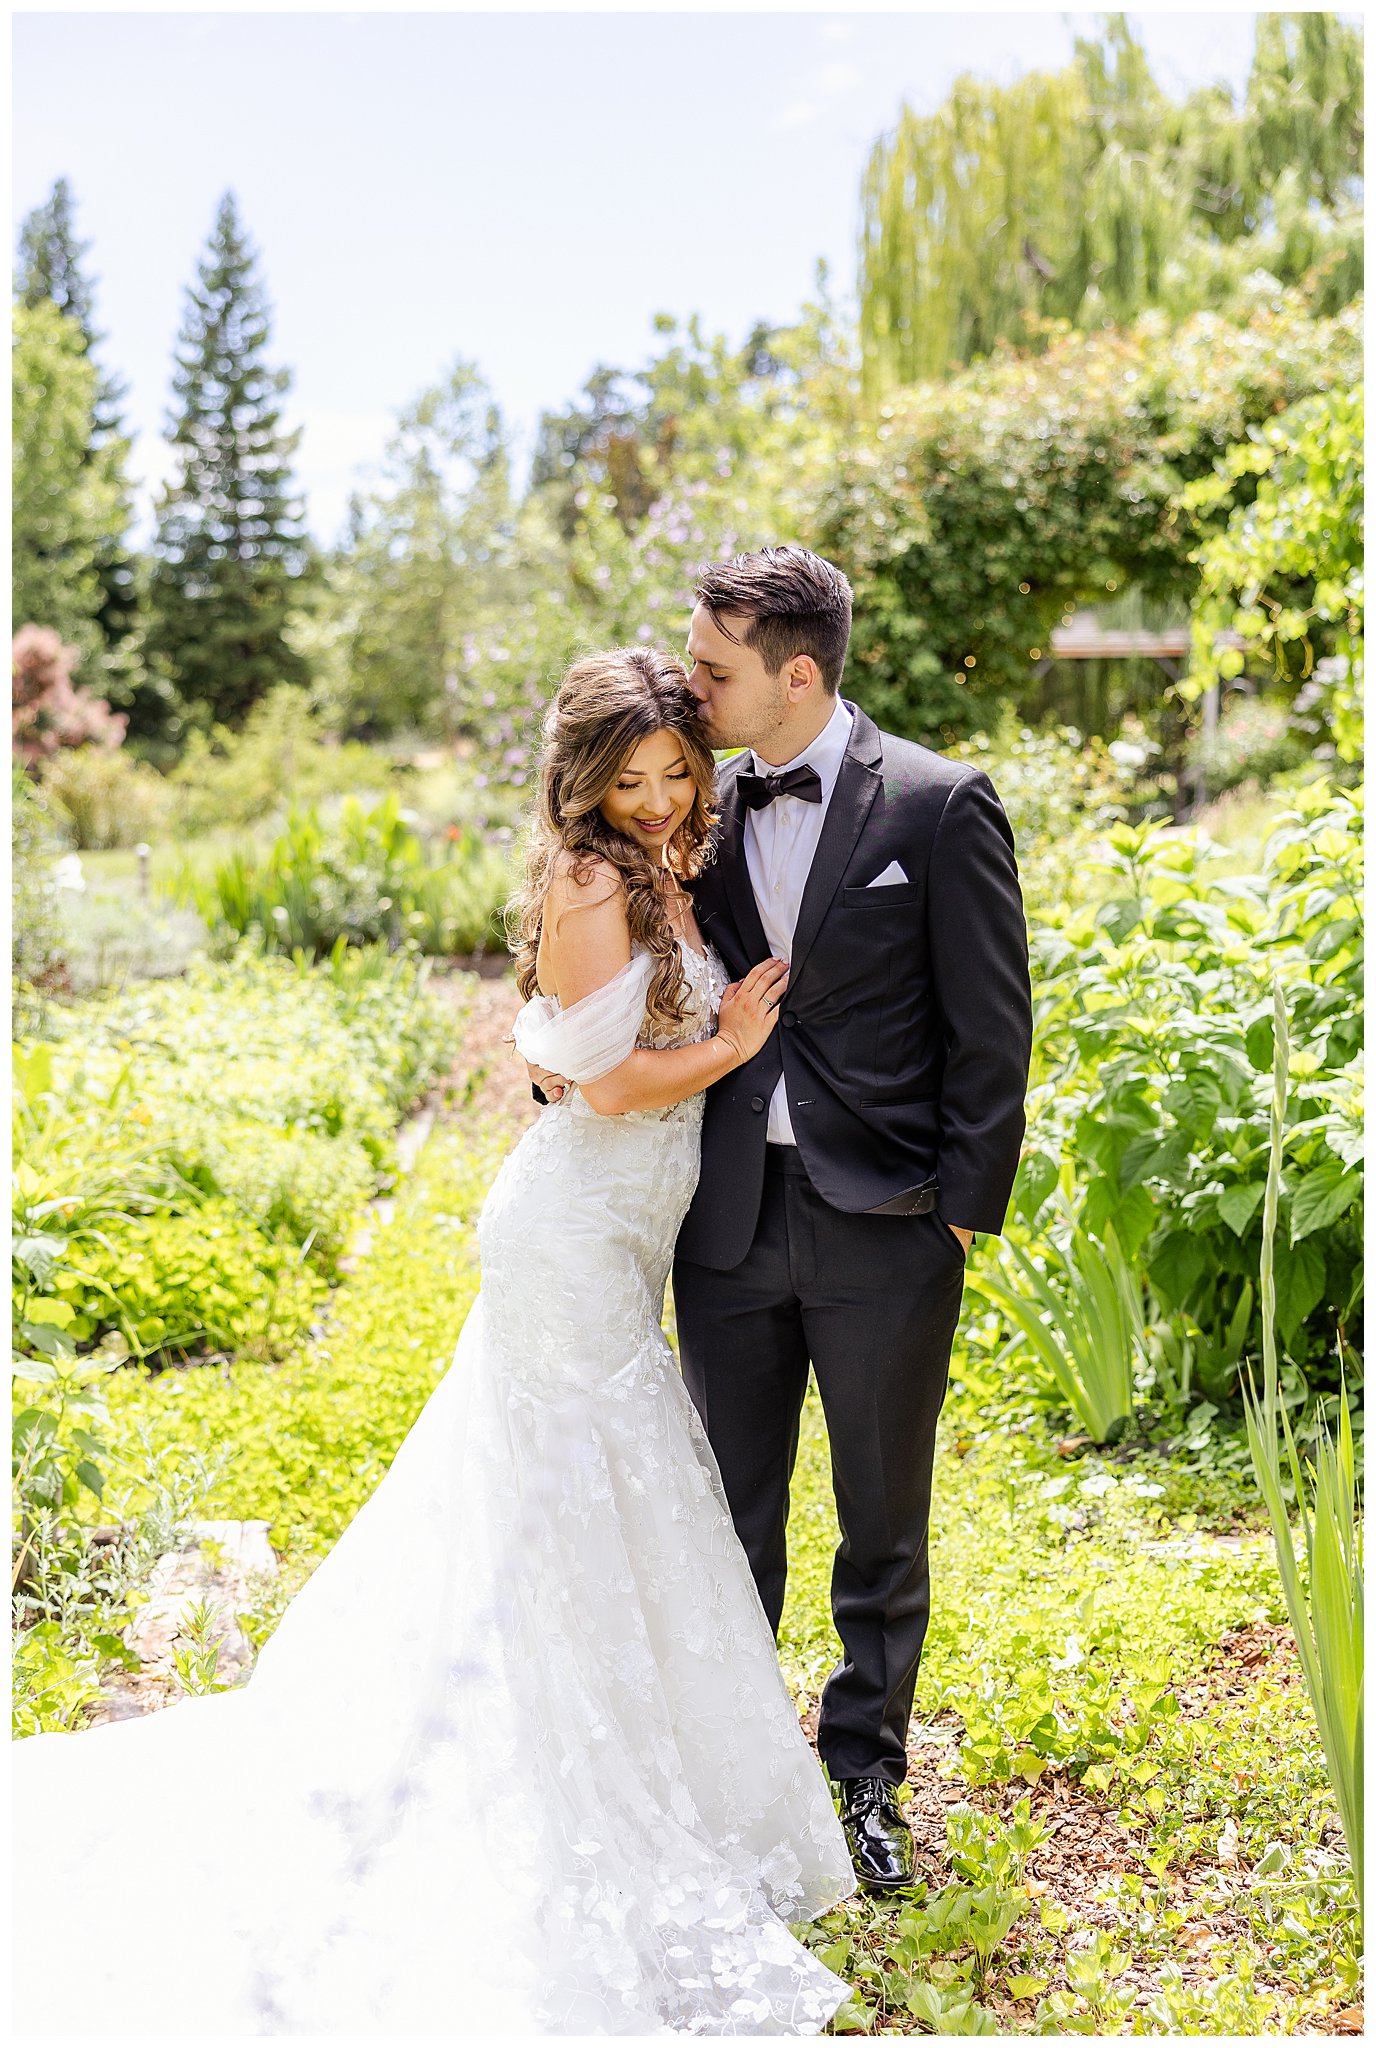 First Look in Garden at White Ranch Events | Kelsi + William